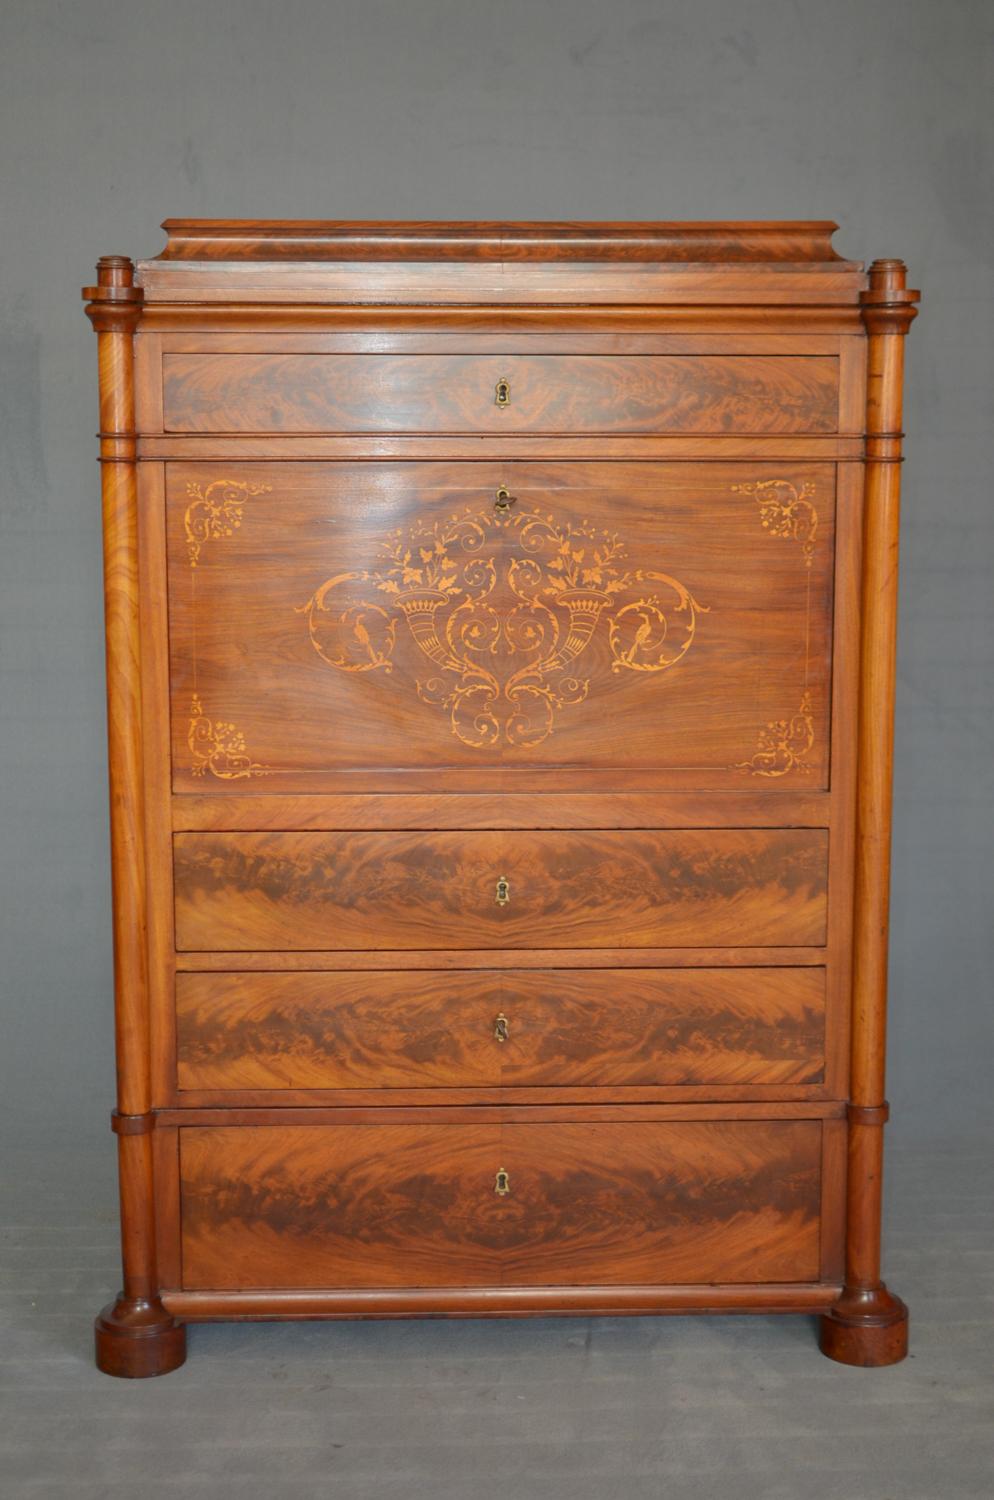 Secretaire Biedermeier inlaid in light mahogany and elm in Danish origin dated 1825 restored. The secretaire is composed of four large external drawers and a large internal space divided into small drawers and a central door. To open the central